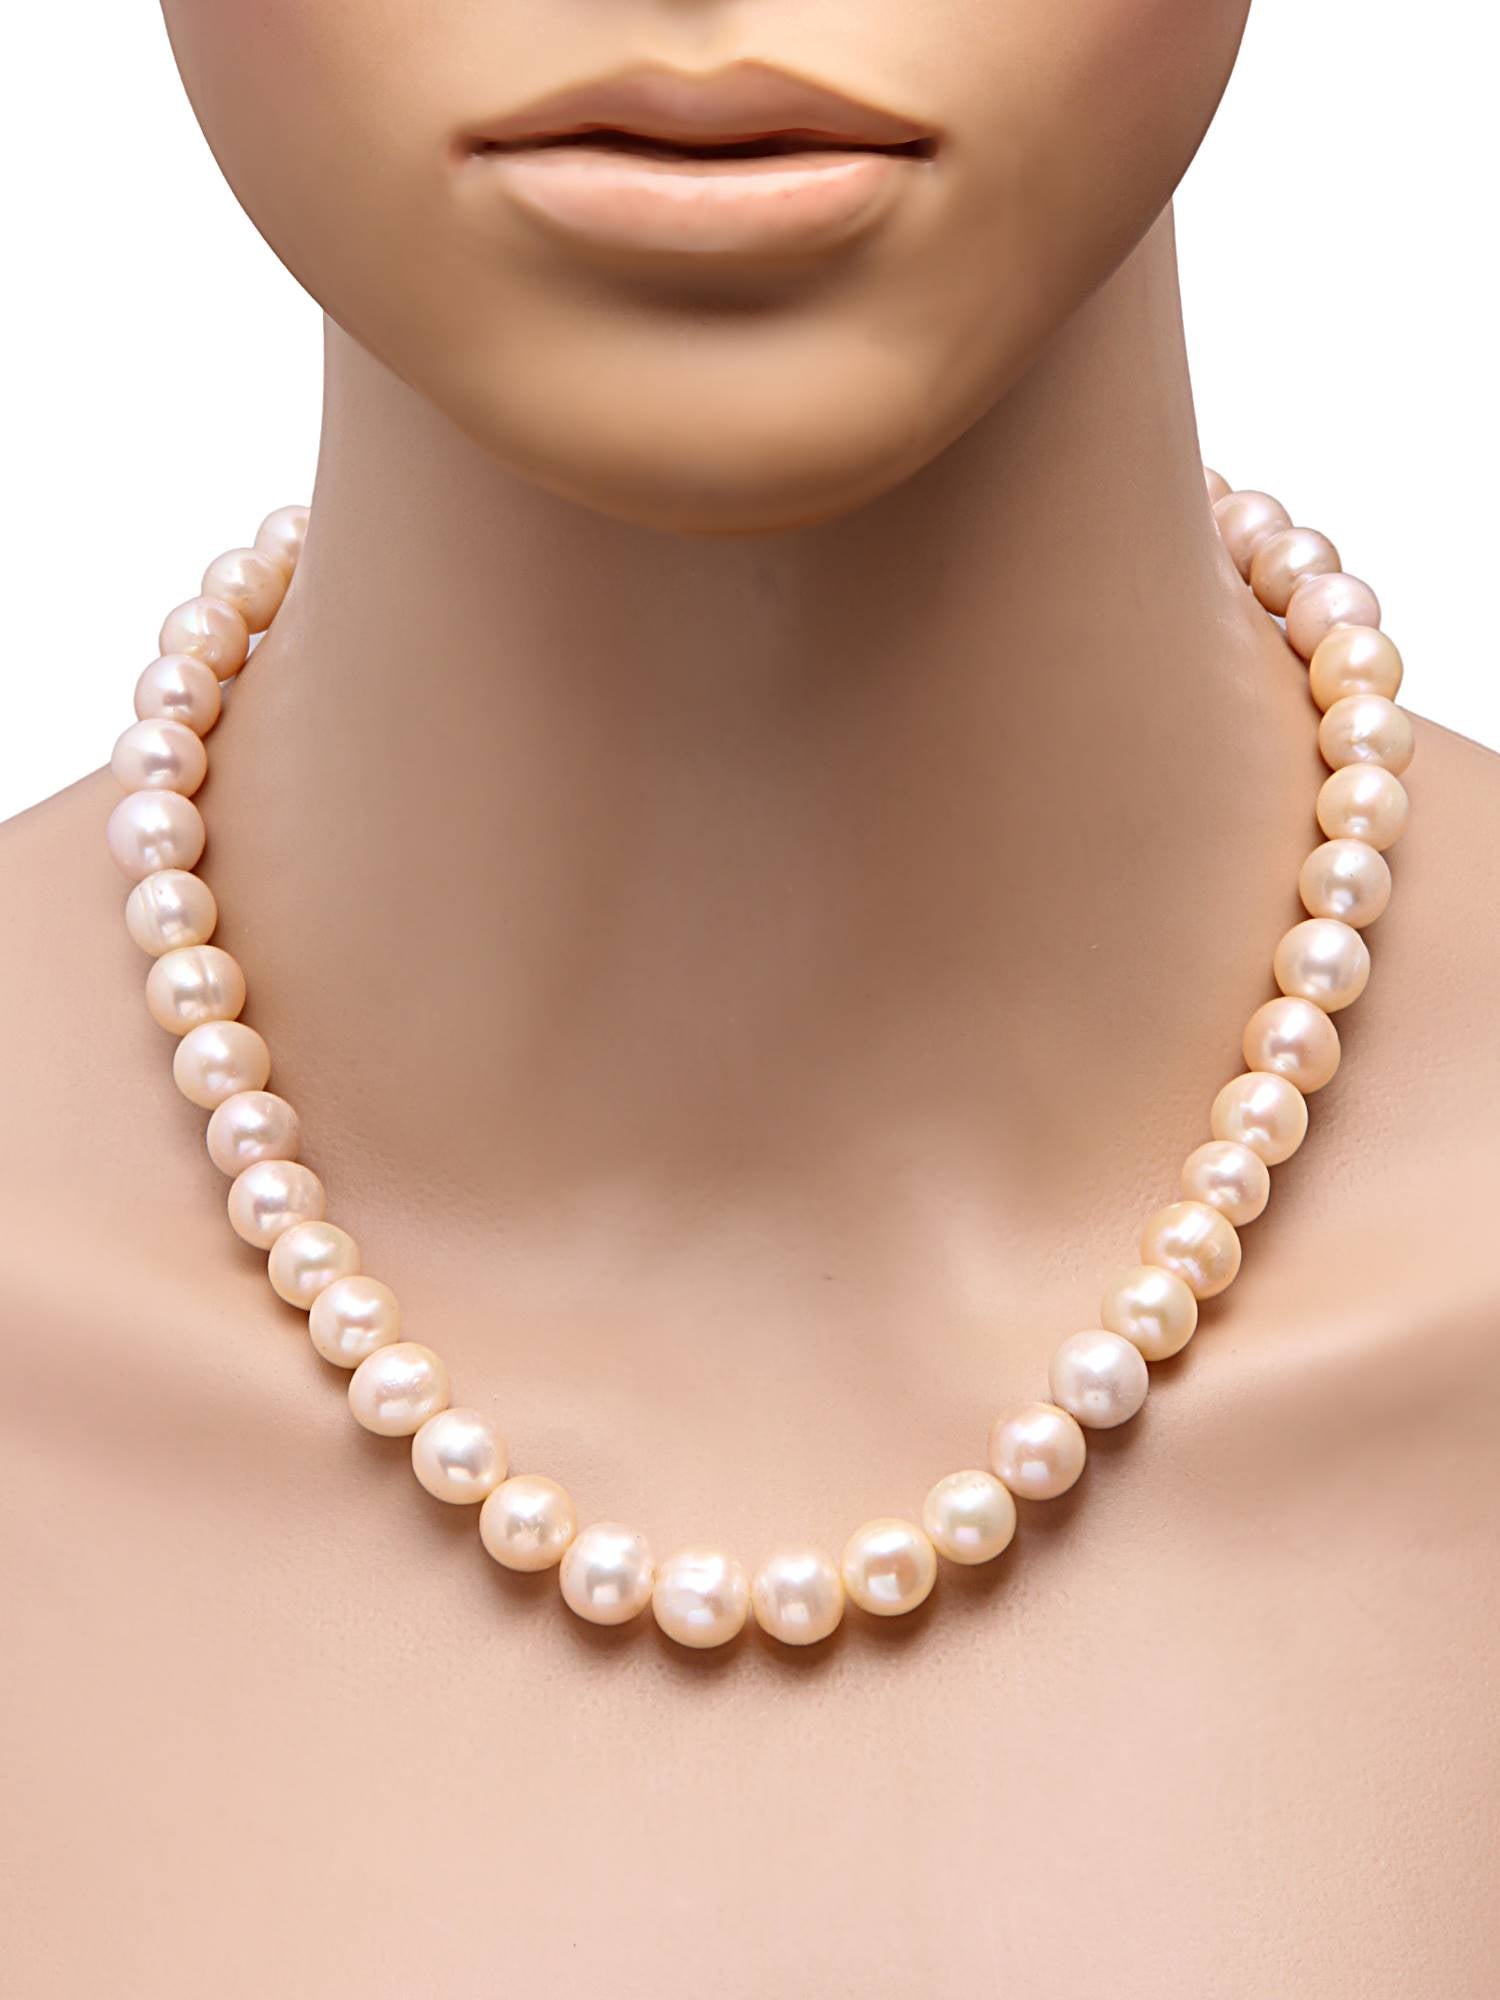 Semi-Round Pastel Pink (10MM) Natural Freshwater Pearl Necklace Set with 92.5 Sterling Silver Clasp, 300 carats- (F1011)